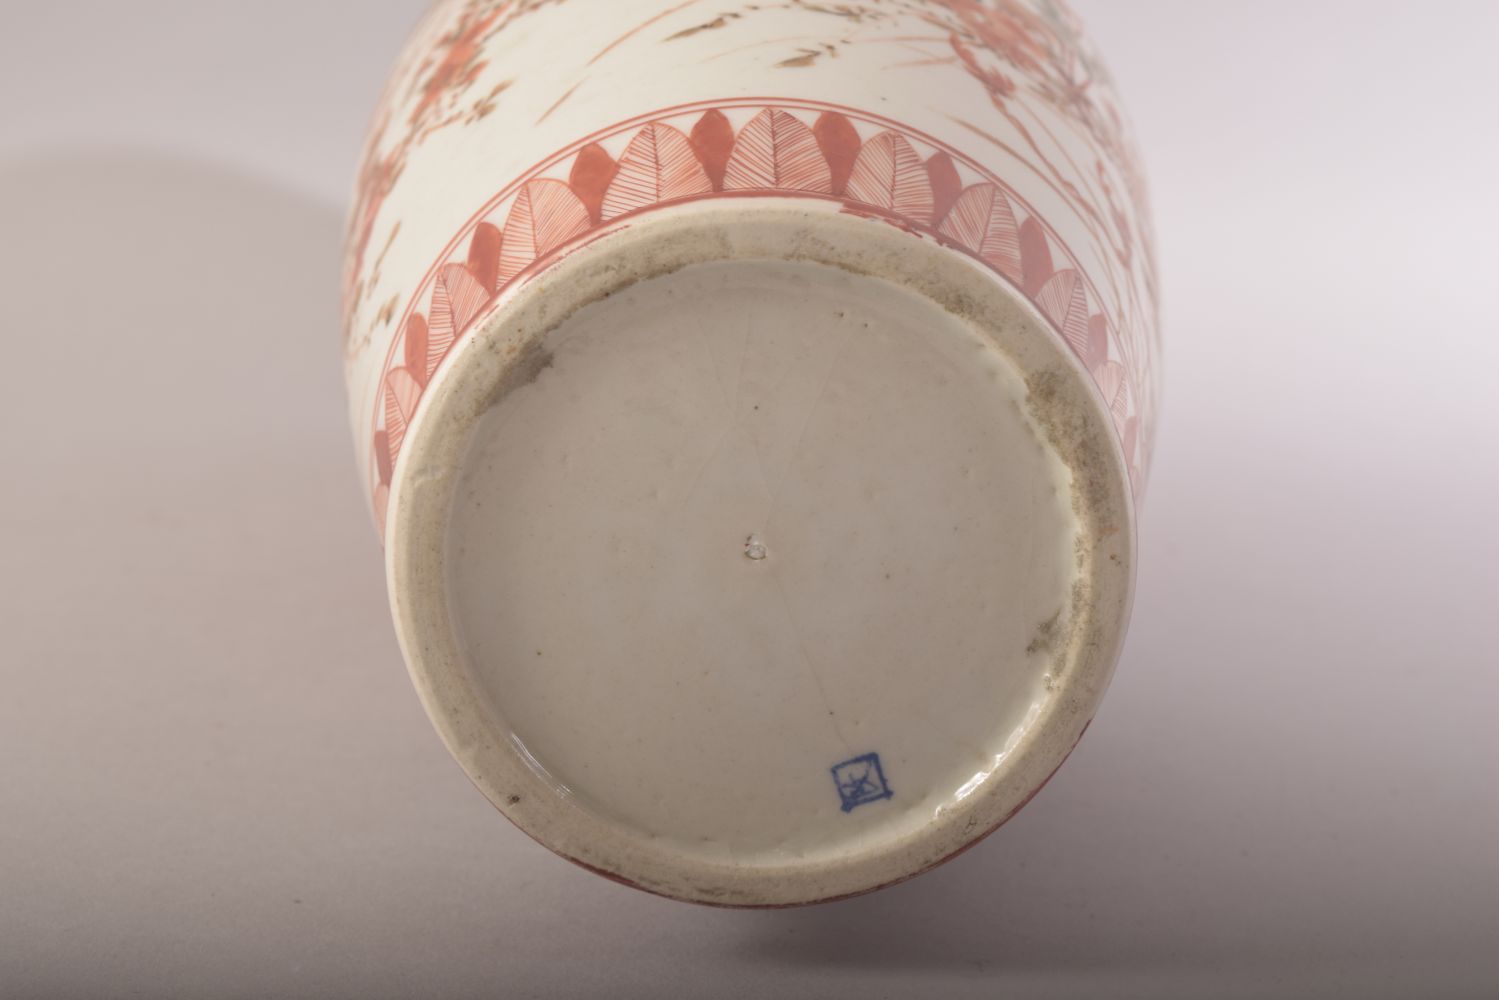 A JAPANESE KUTANI PORCELAIN VASE, painted with birds, native flora and gilt highlights, 30.5cm - Image 6 of 7